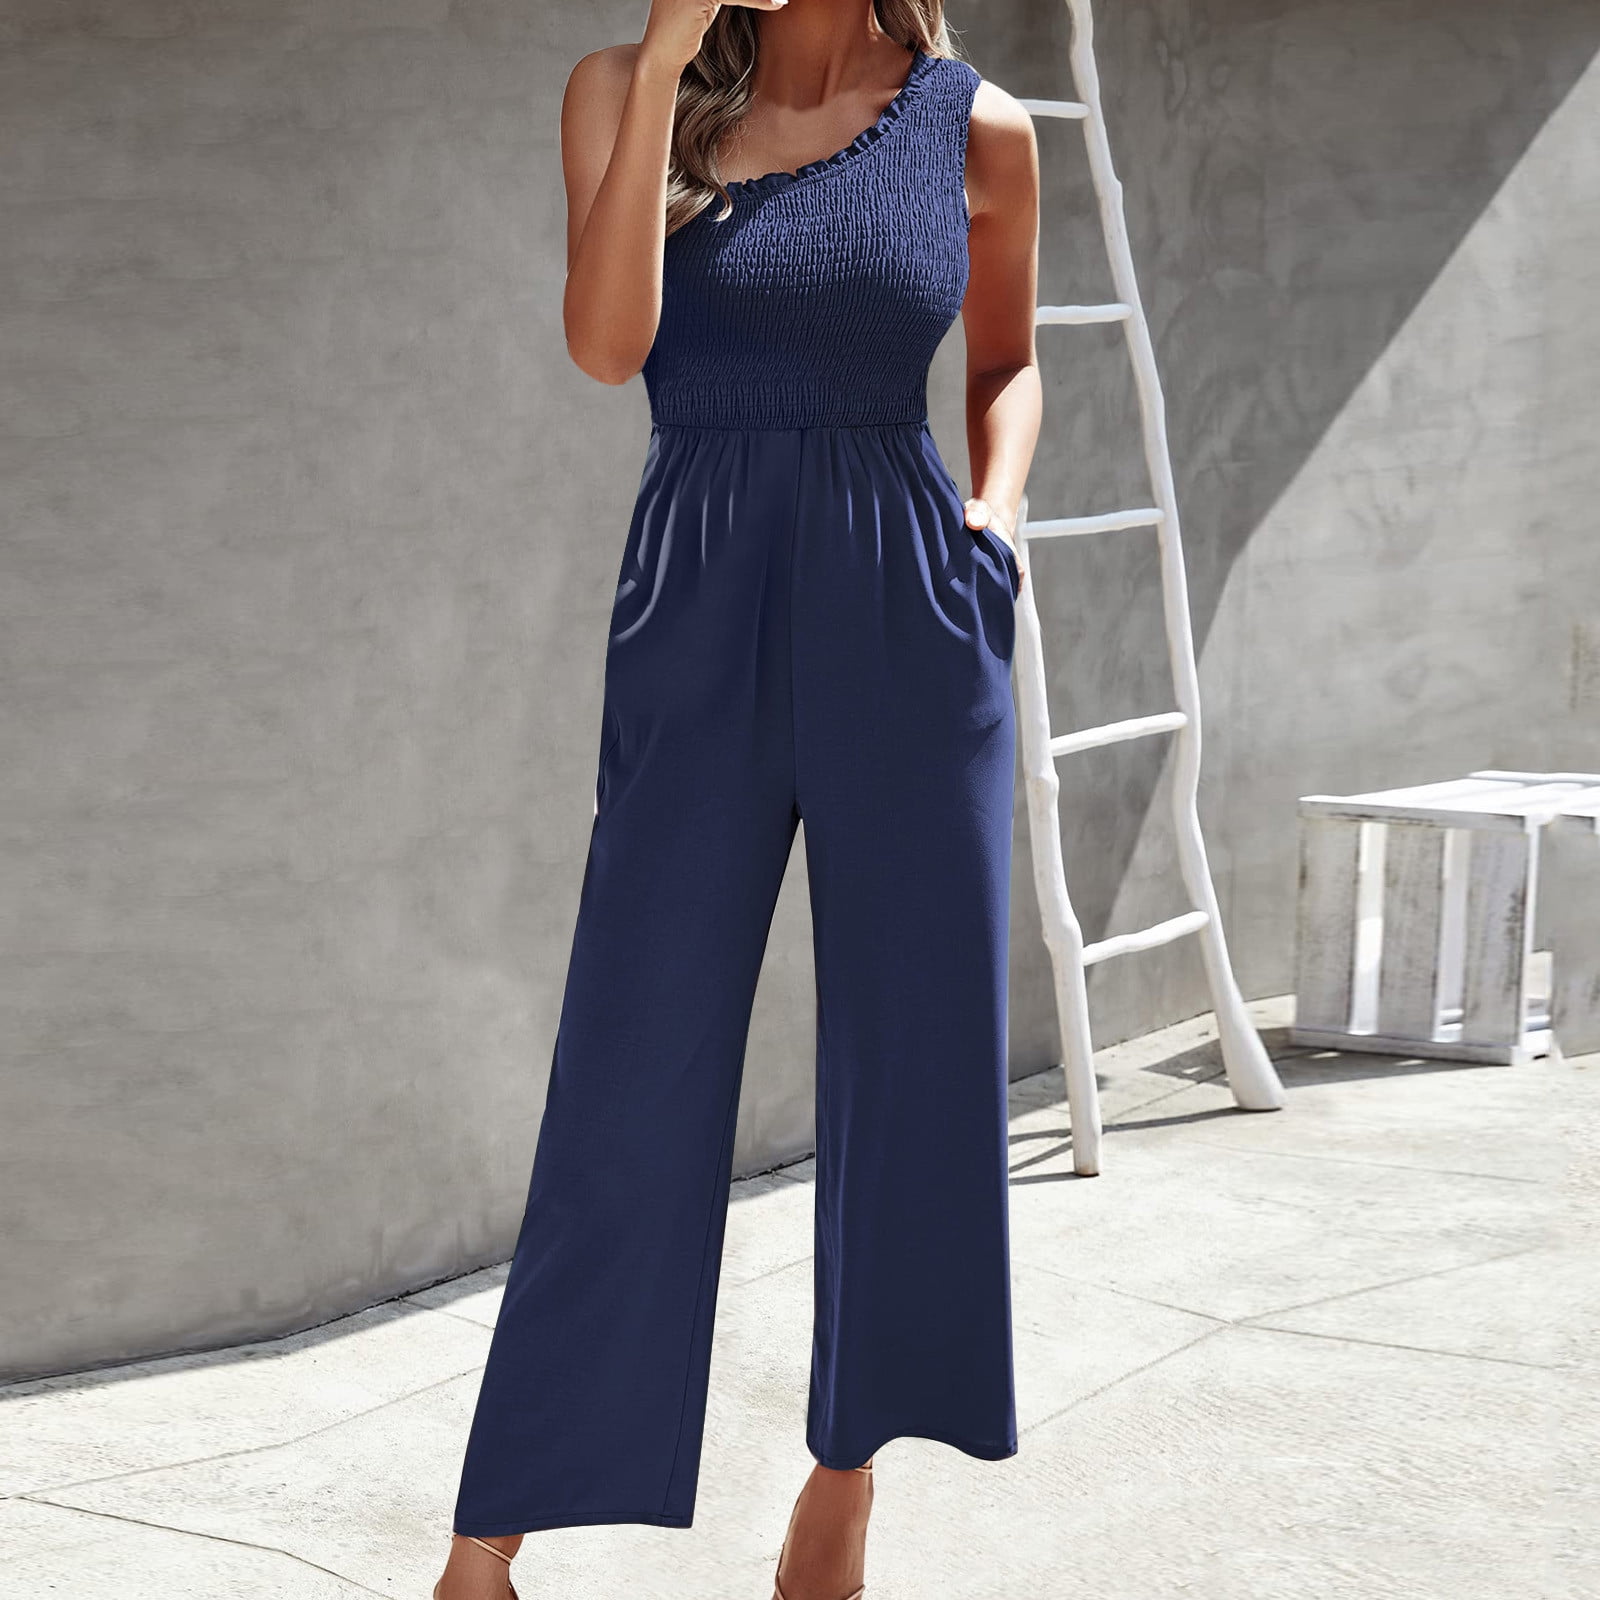 Womens Casual Short Sleeve Jumpsuit Rompers Striped Print Elegant Wrap Loose Palazzo Cropped Pants Soft Breathable Summer Lounge Playsuit Beachwear 